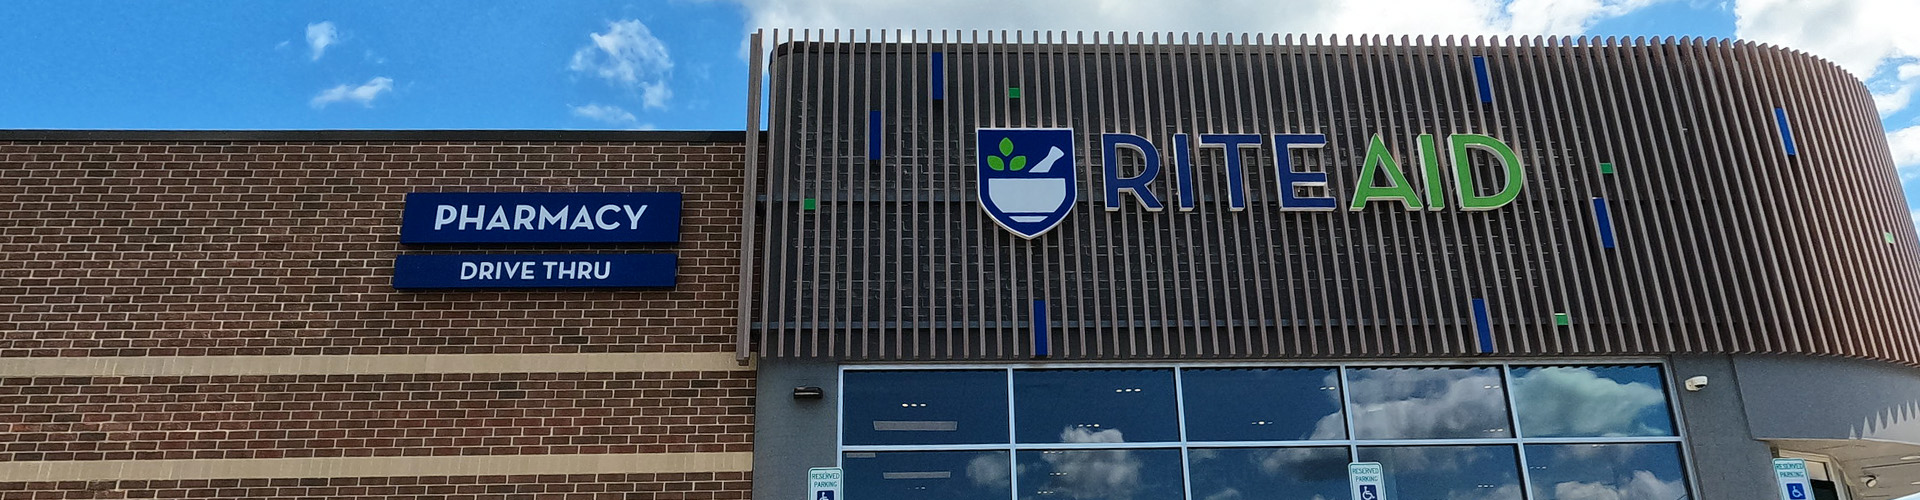 Rite Aid RxEvolution – Report Banner featuring RiteAid Storefront and pharmacy sign